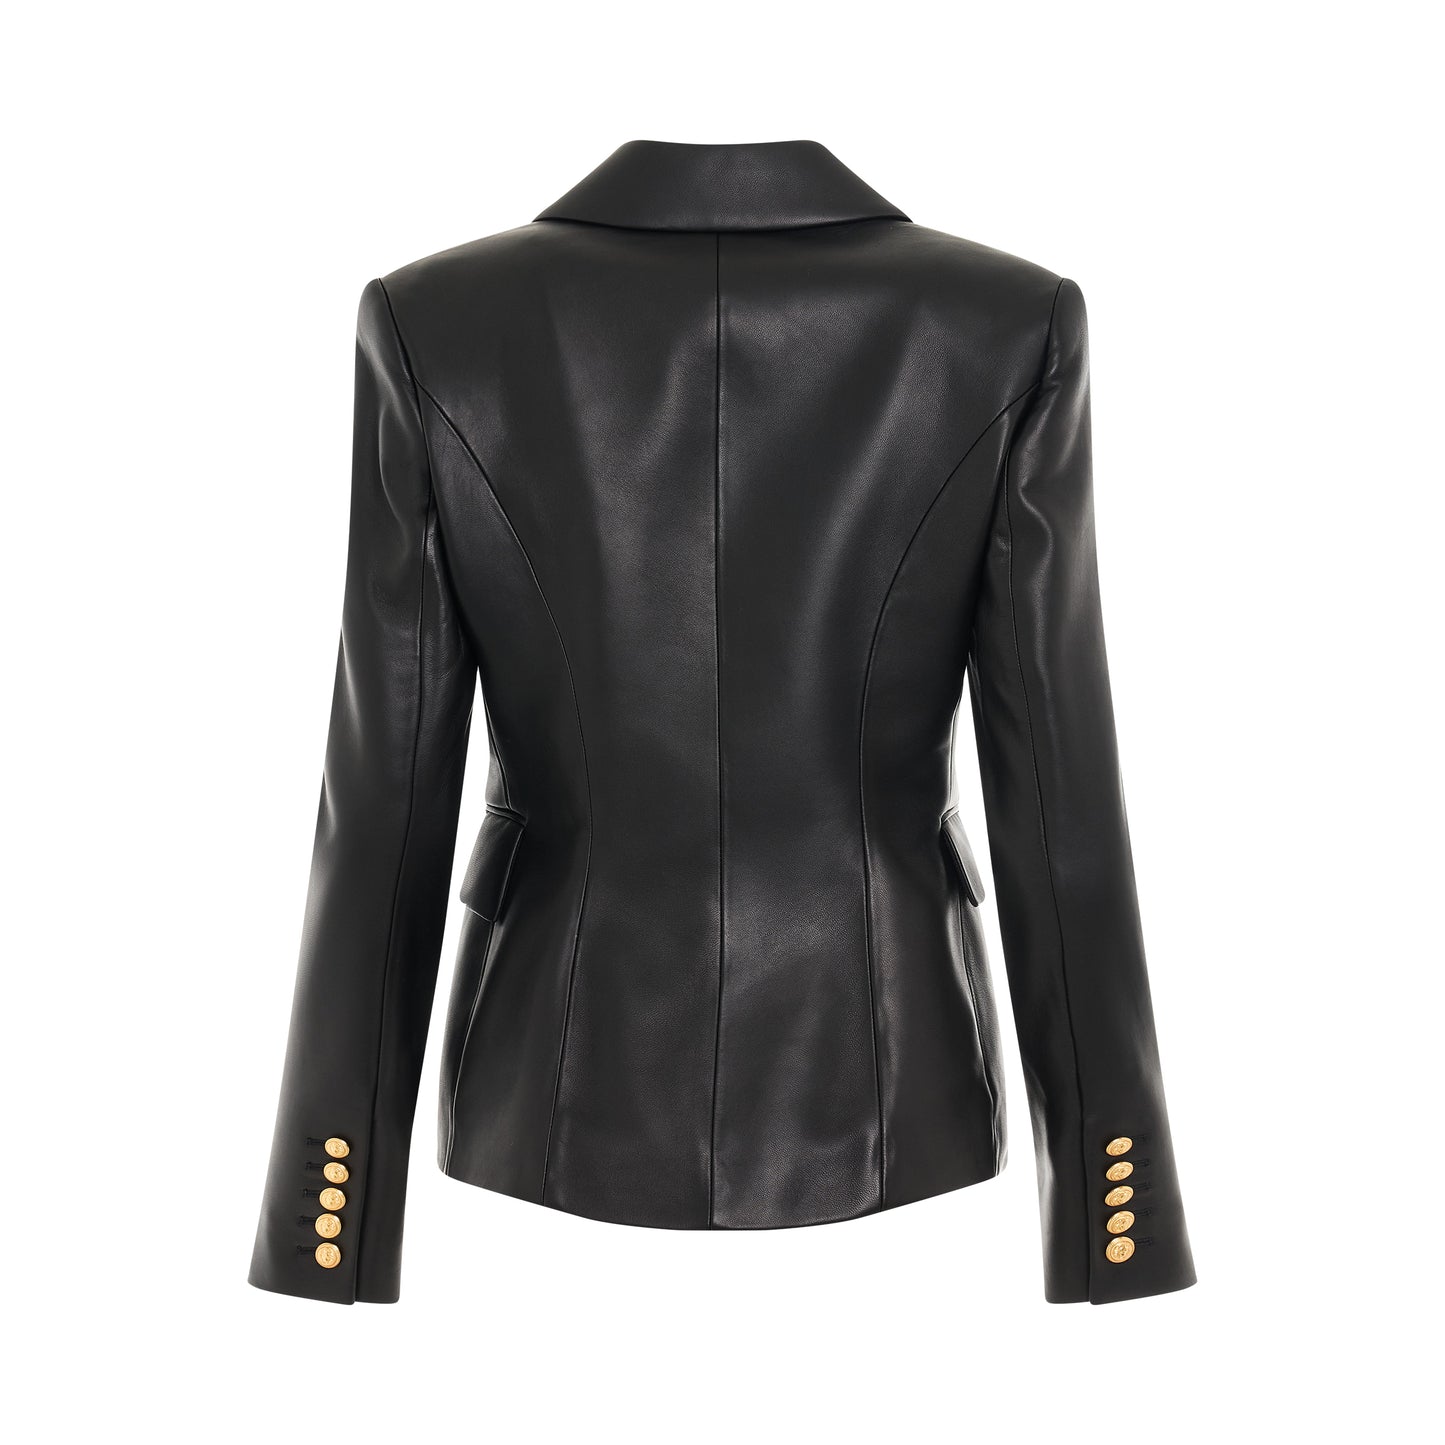 6 Buttons Leather Jacket in Black